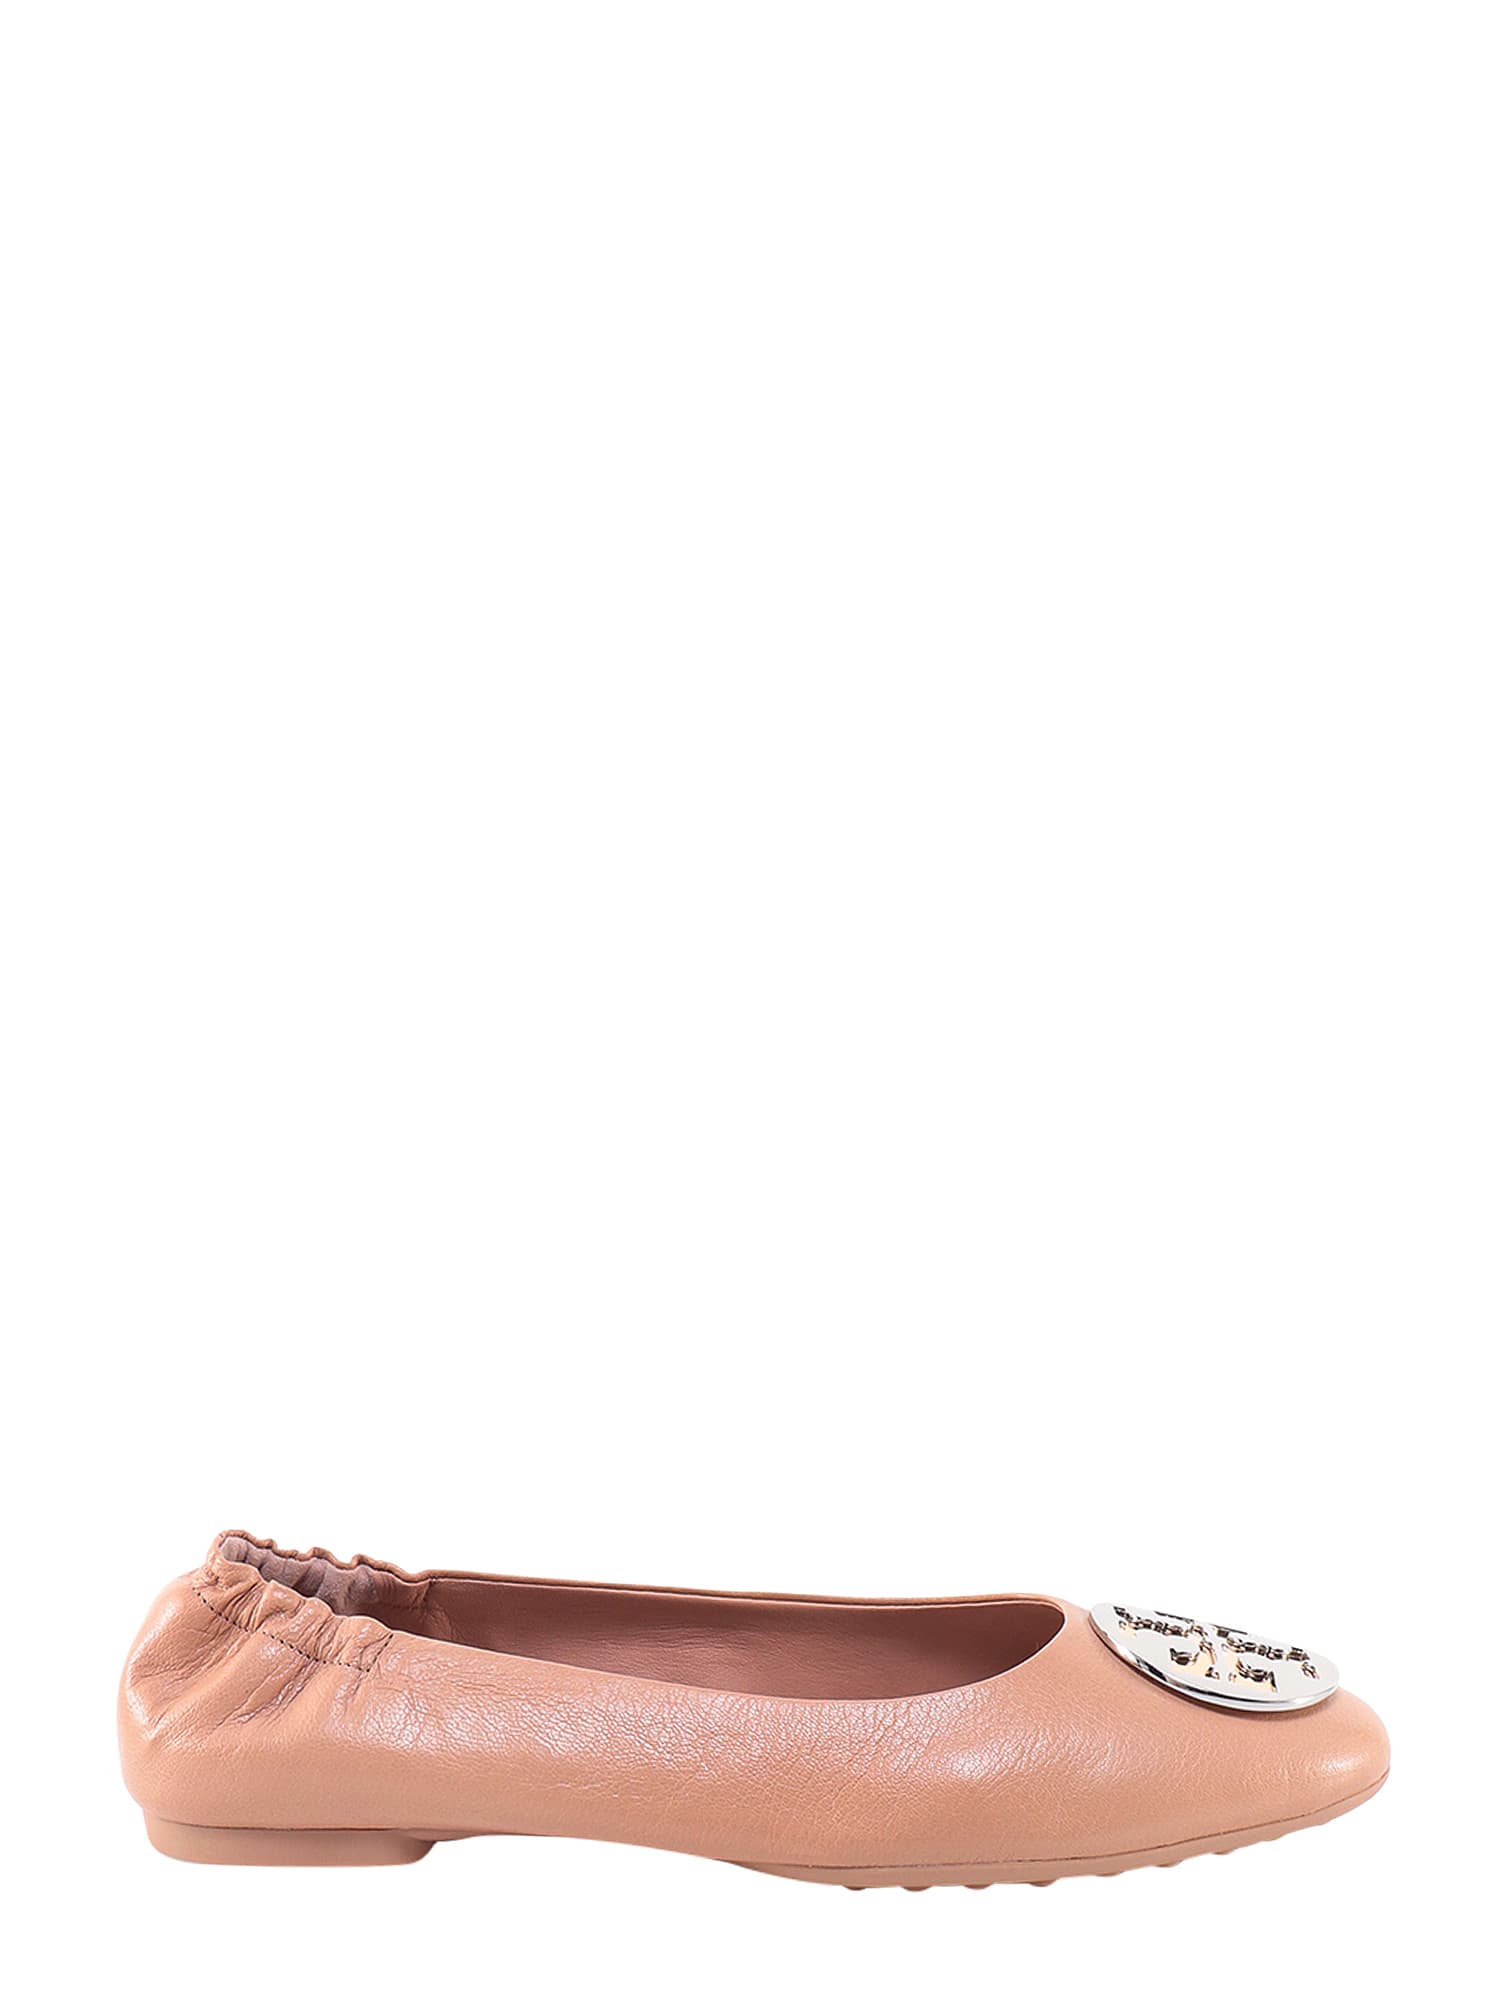 Shop Tory Burch Ballerinas Flat Shoes In Sand